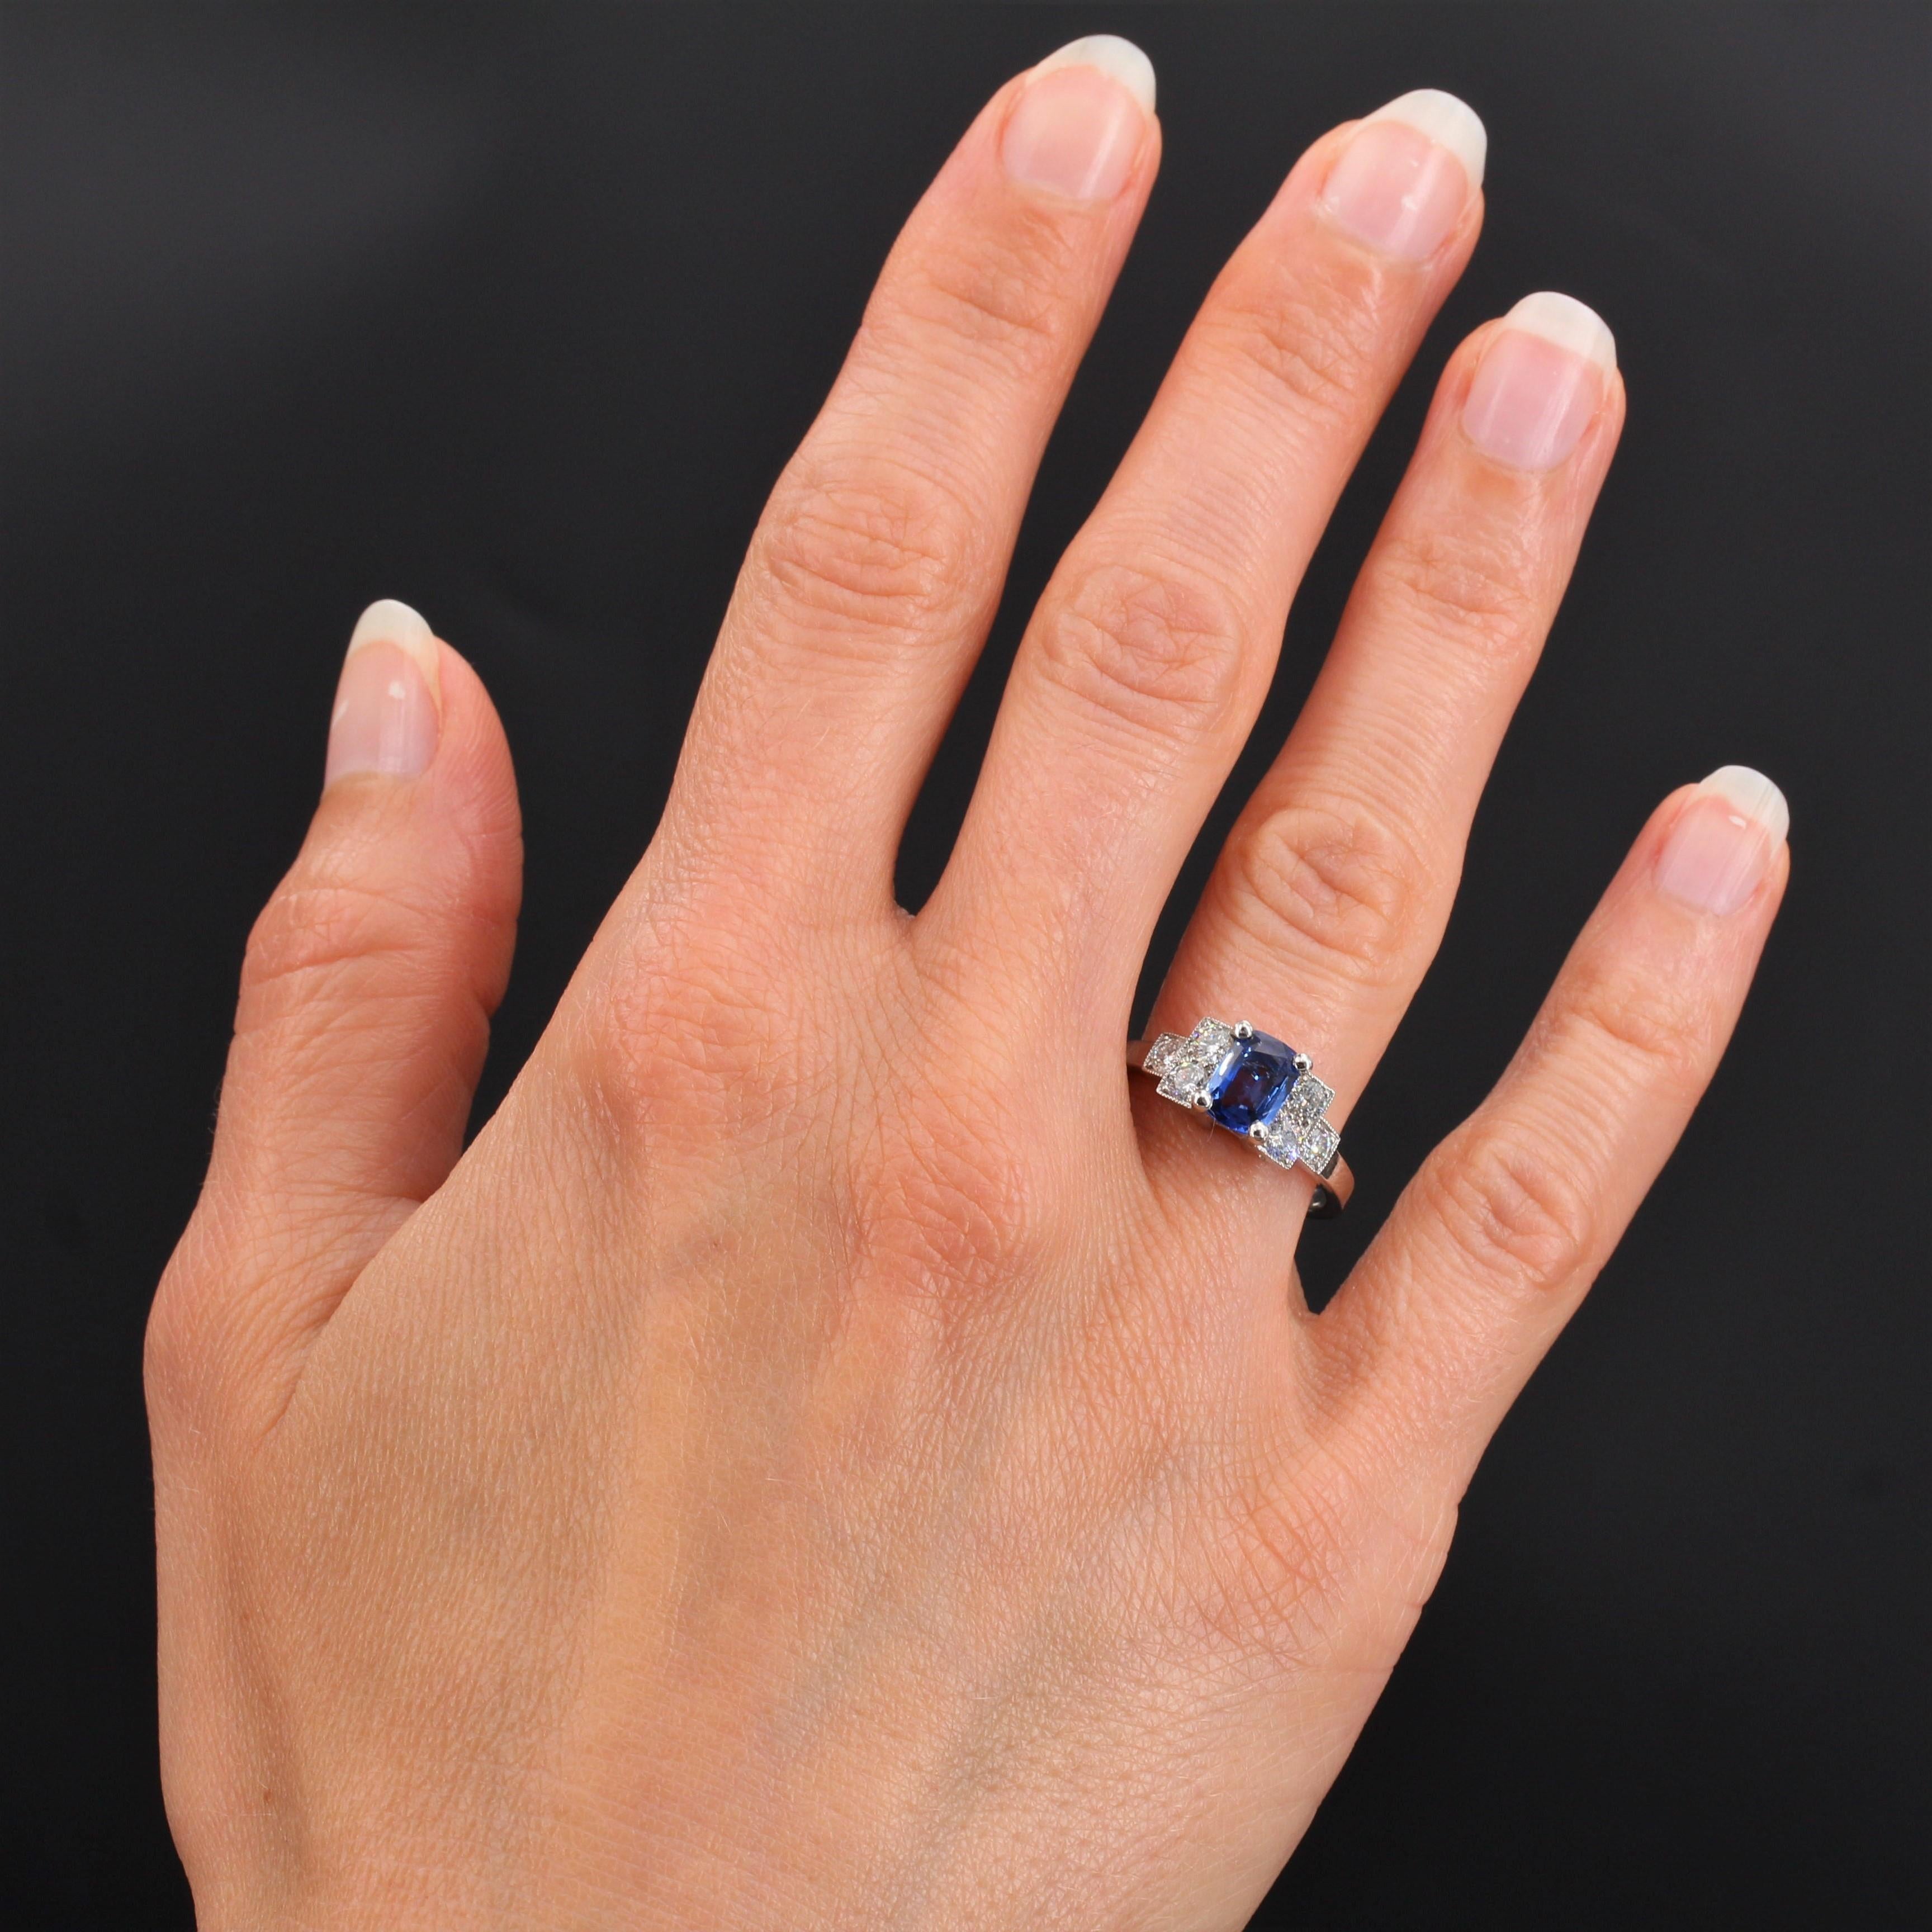 Ring in platinum.
This lovely art deco ring is set with a cushion-cut sapphire, set in four claws, with 2 x 3 modern brilliant-cut diamonds on either side in a stepped pattern.
Weight of the sapphire : 2.03 carat approximately.
Total weight of the